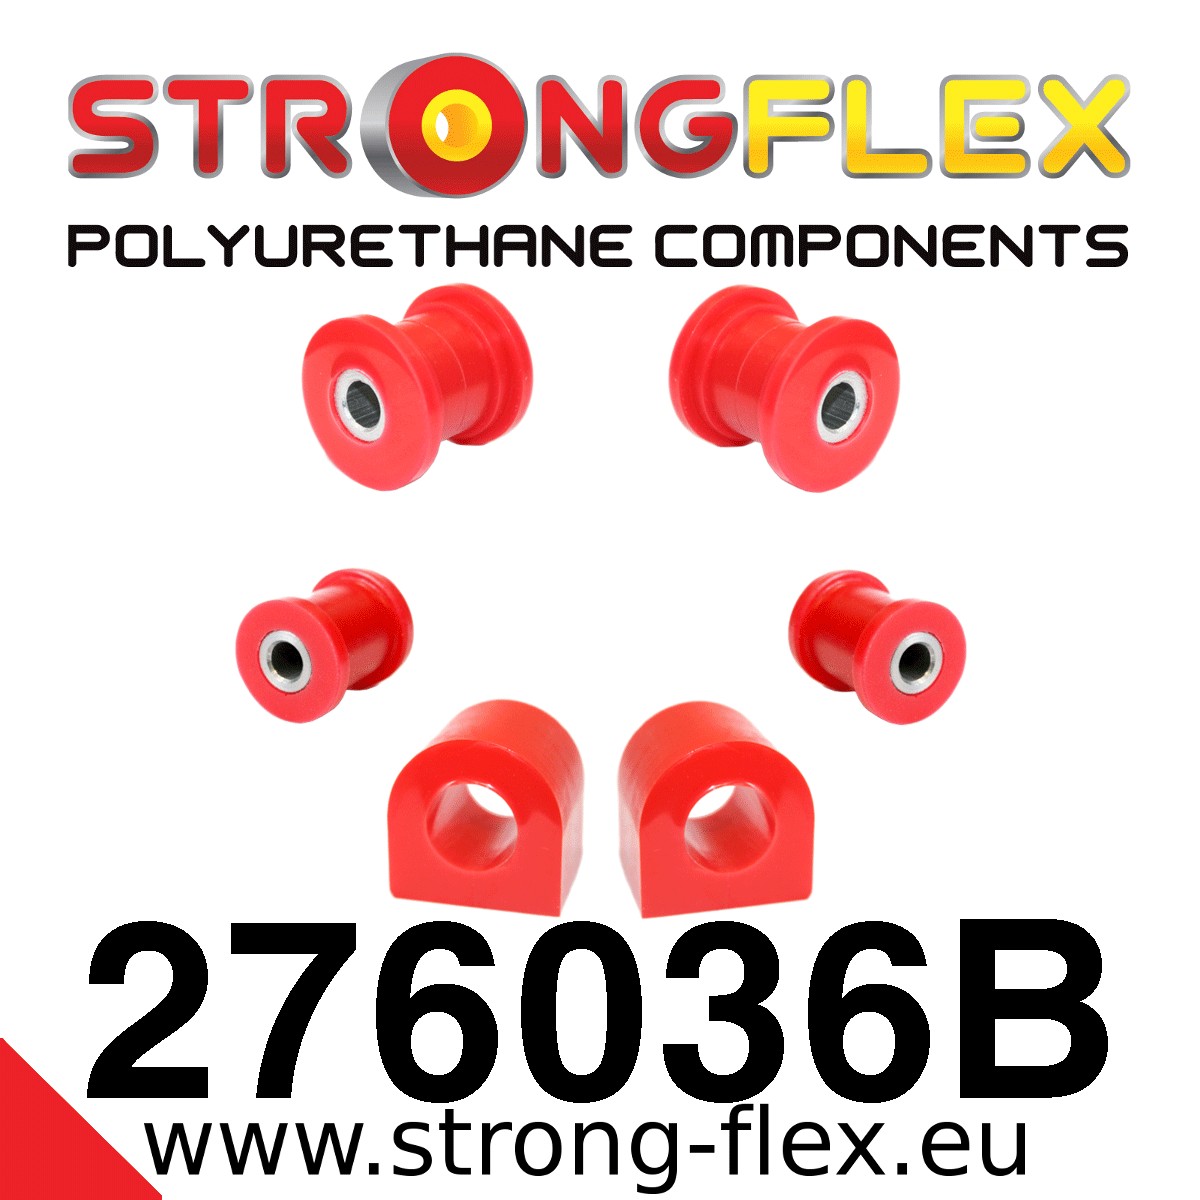 images/productimages/small/Strongflex-1968.jpg